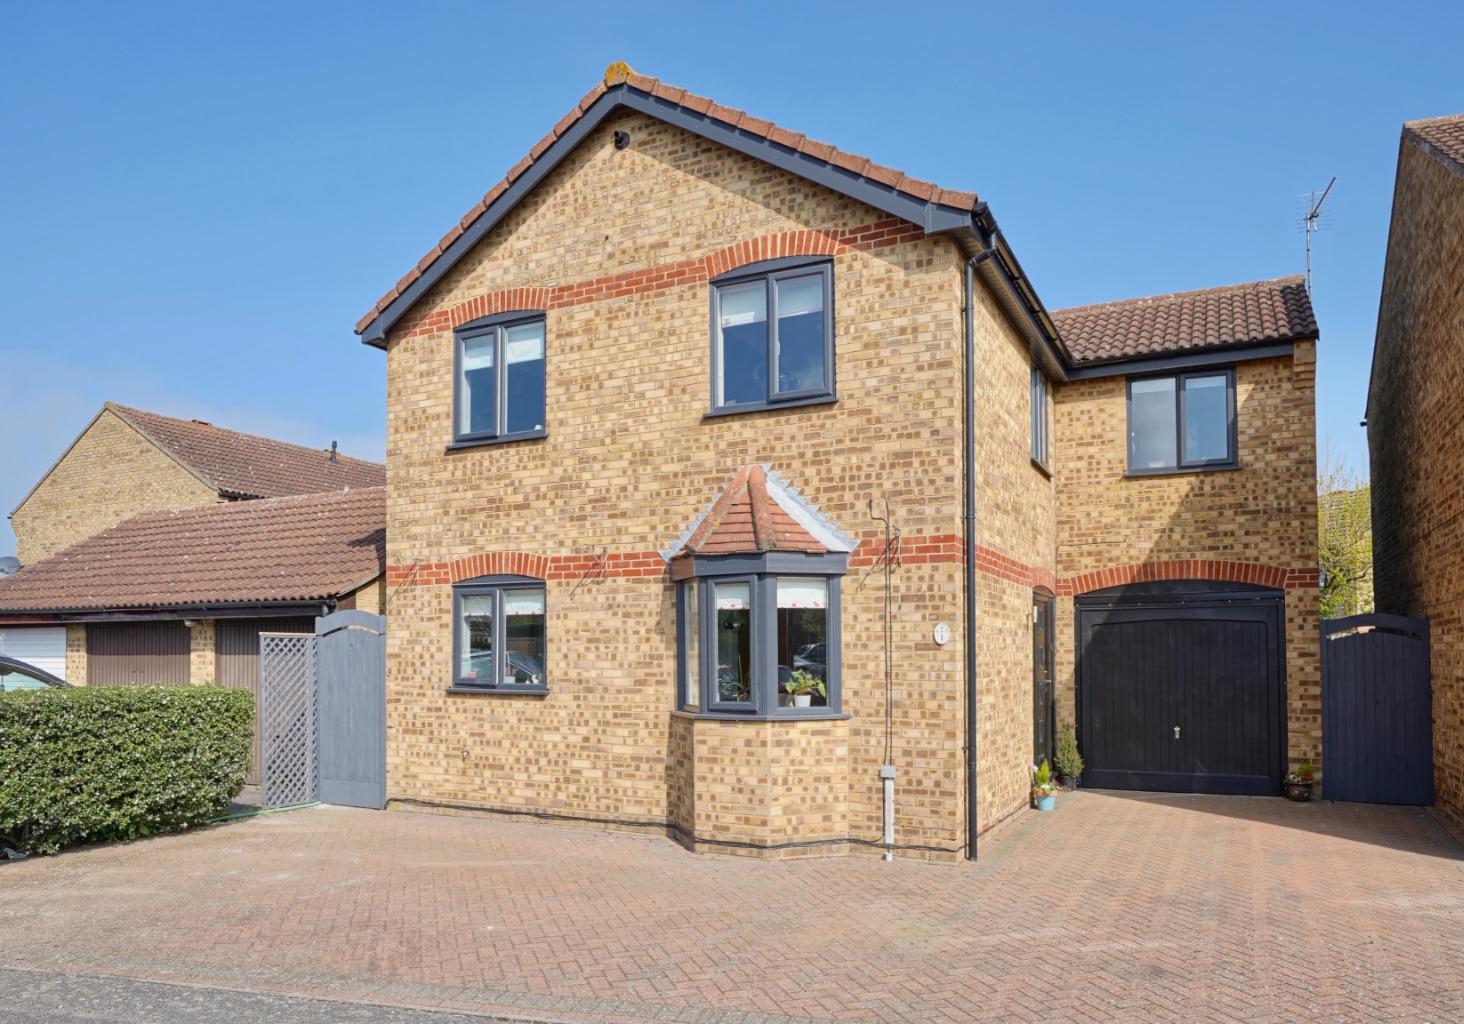 **OPEN HOUSE SATURDAY 7/5 9.30AM - 12PM** CALL TO BOOK YOUR VIEWING TIME** Four good size bedrooms* extended ground floor accommodation* plenty of off road parking* set in quiet cul-de-sac* stunning re-fitted kitchen/breakfast room* viewing in highly recommended**